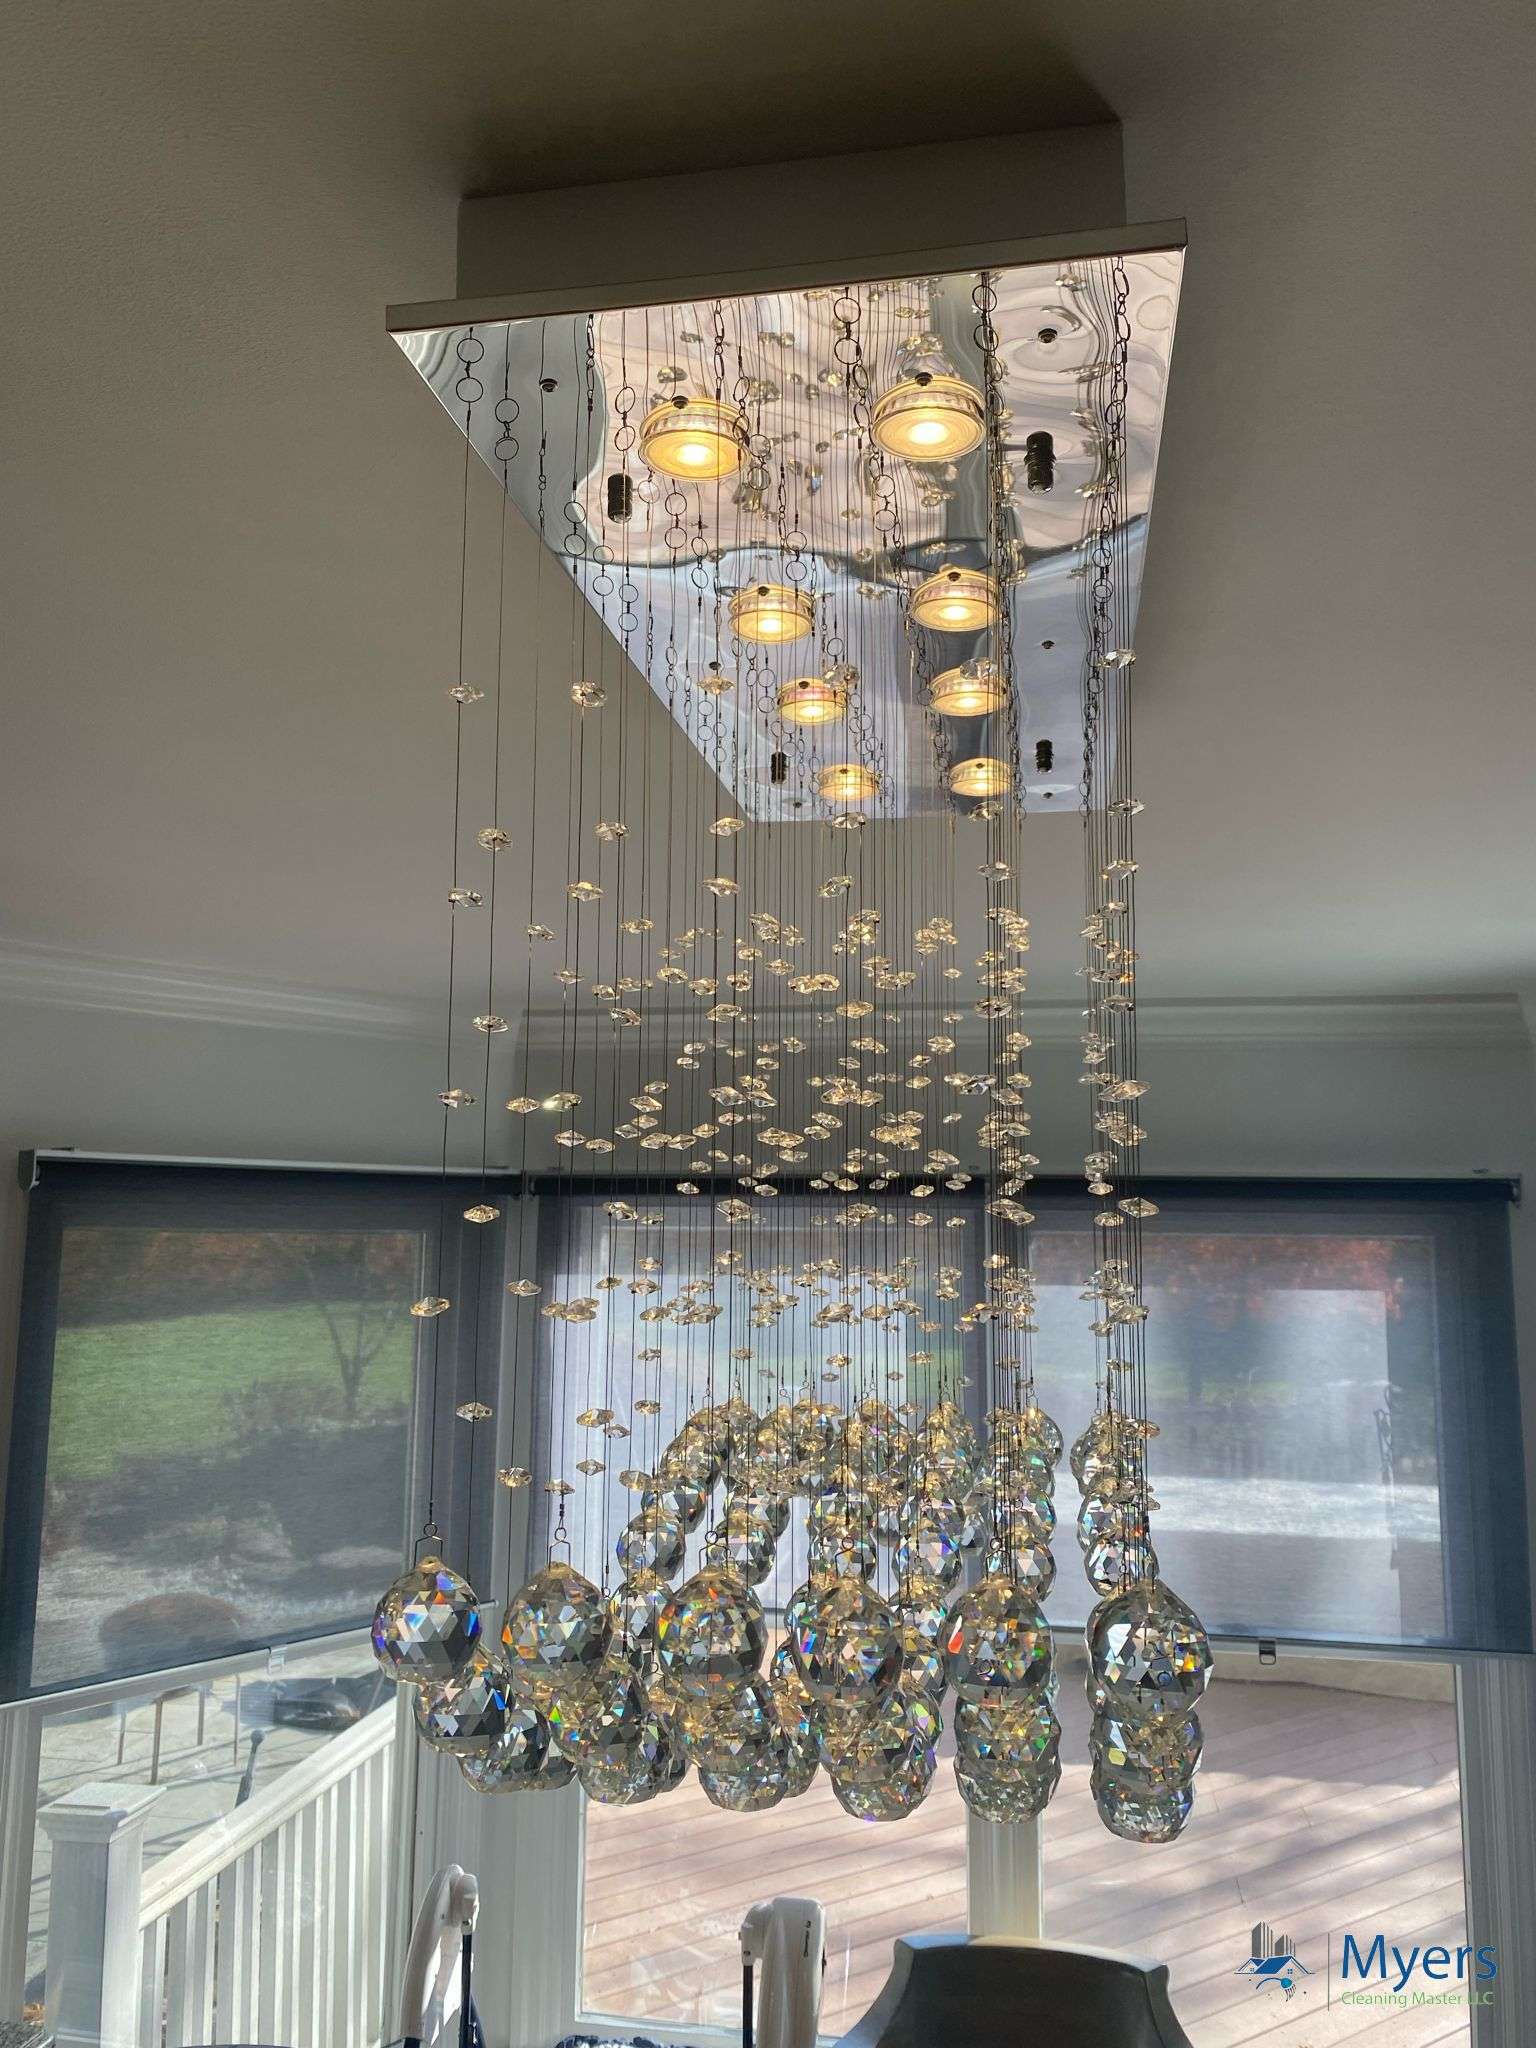 Chandelier cleaning service